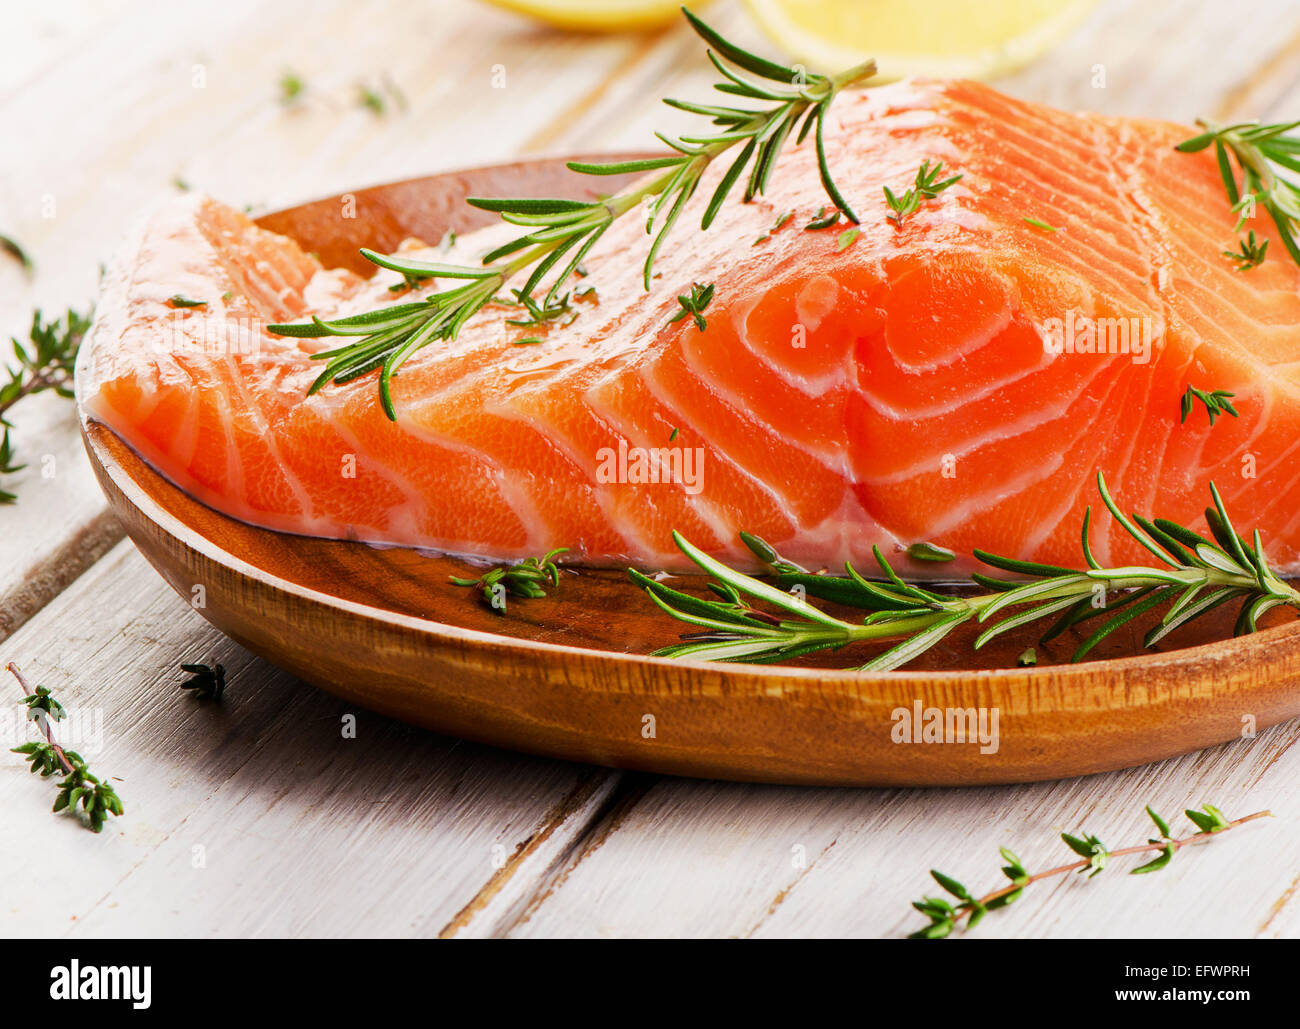 Salmon fillet on wooden background. Selective focus Stock Photo